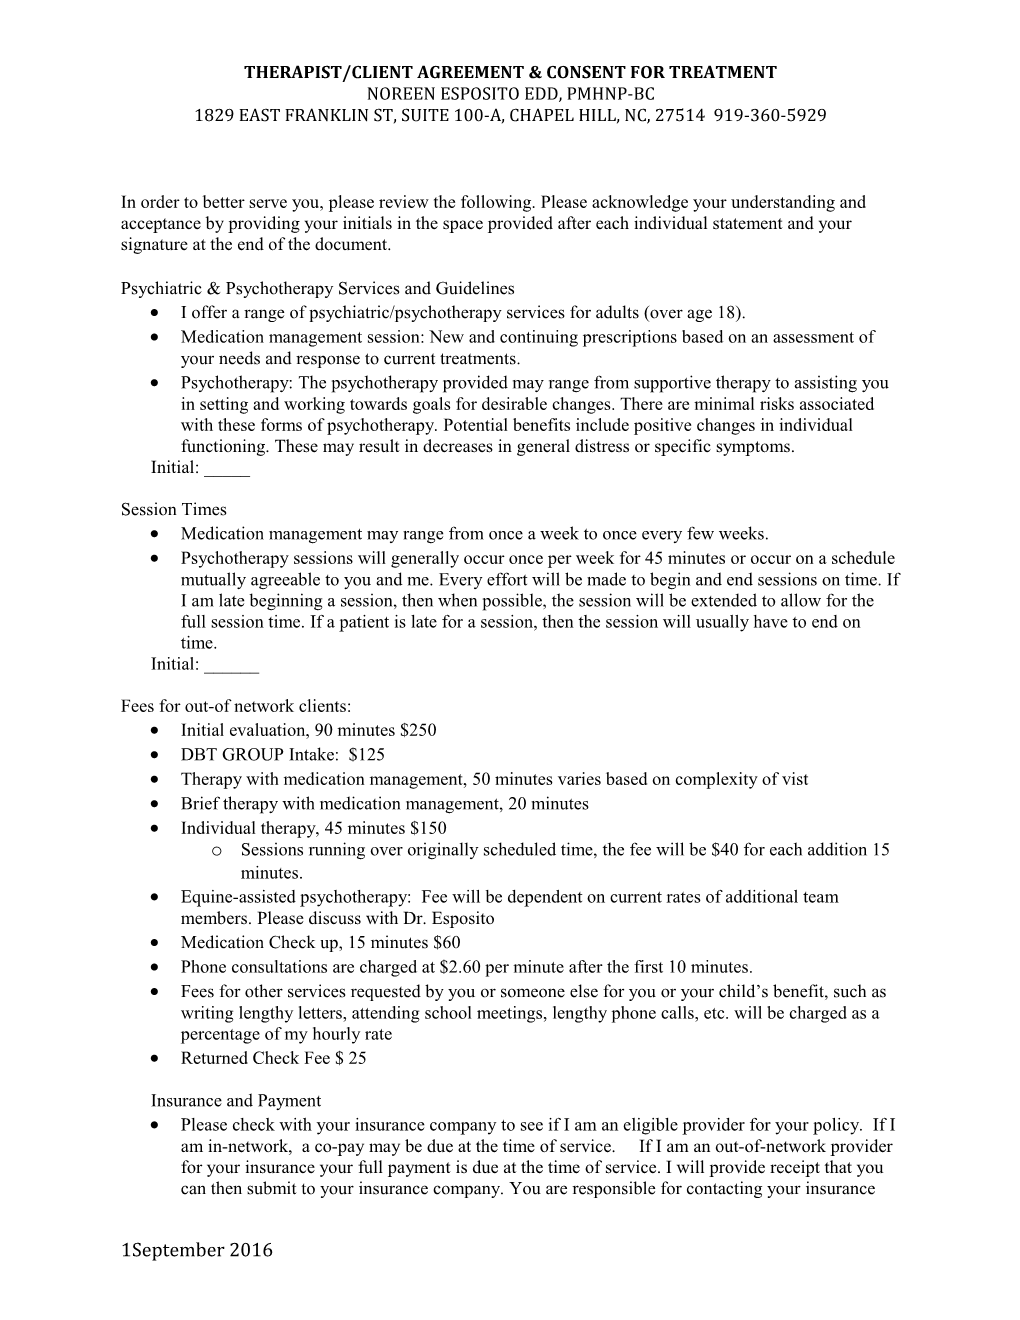 Therapist/Client Agreement & Consent for Treatment